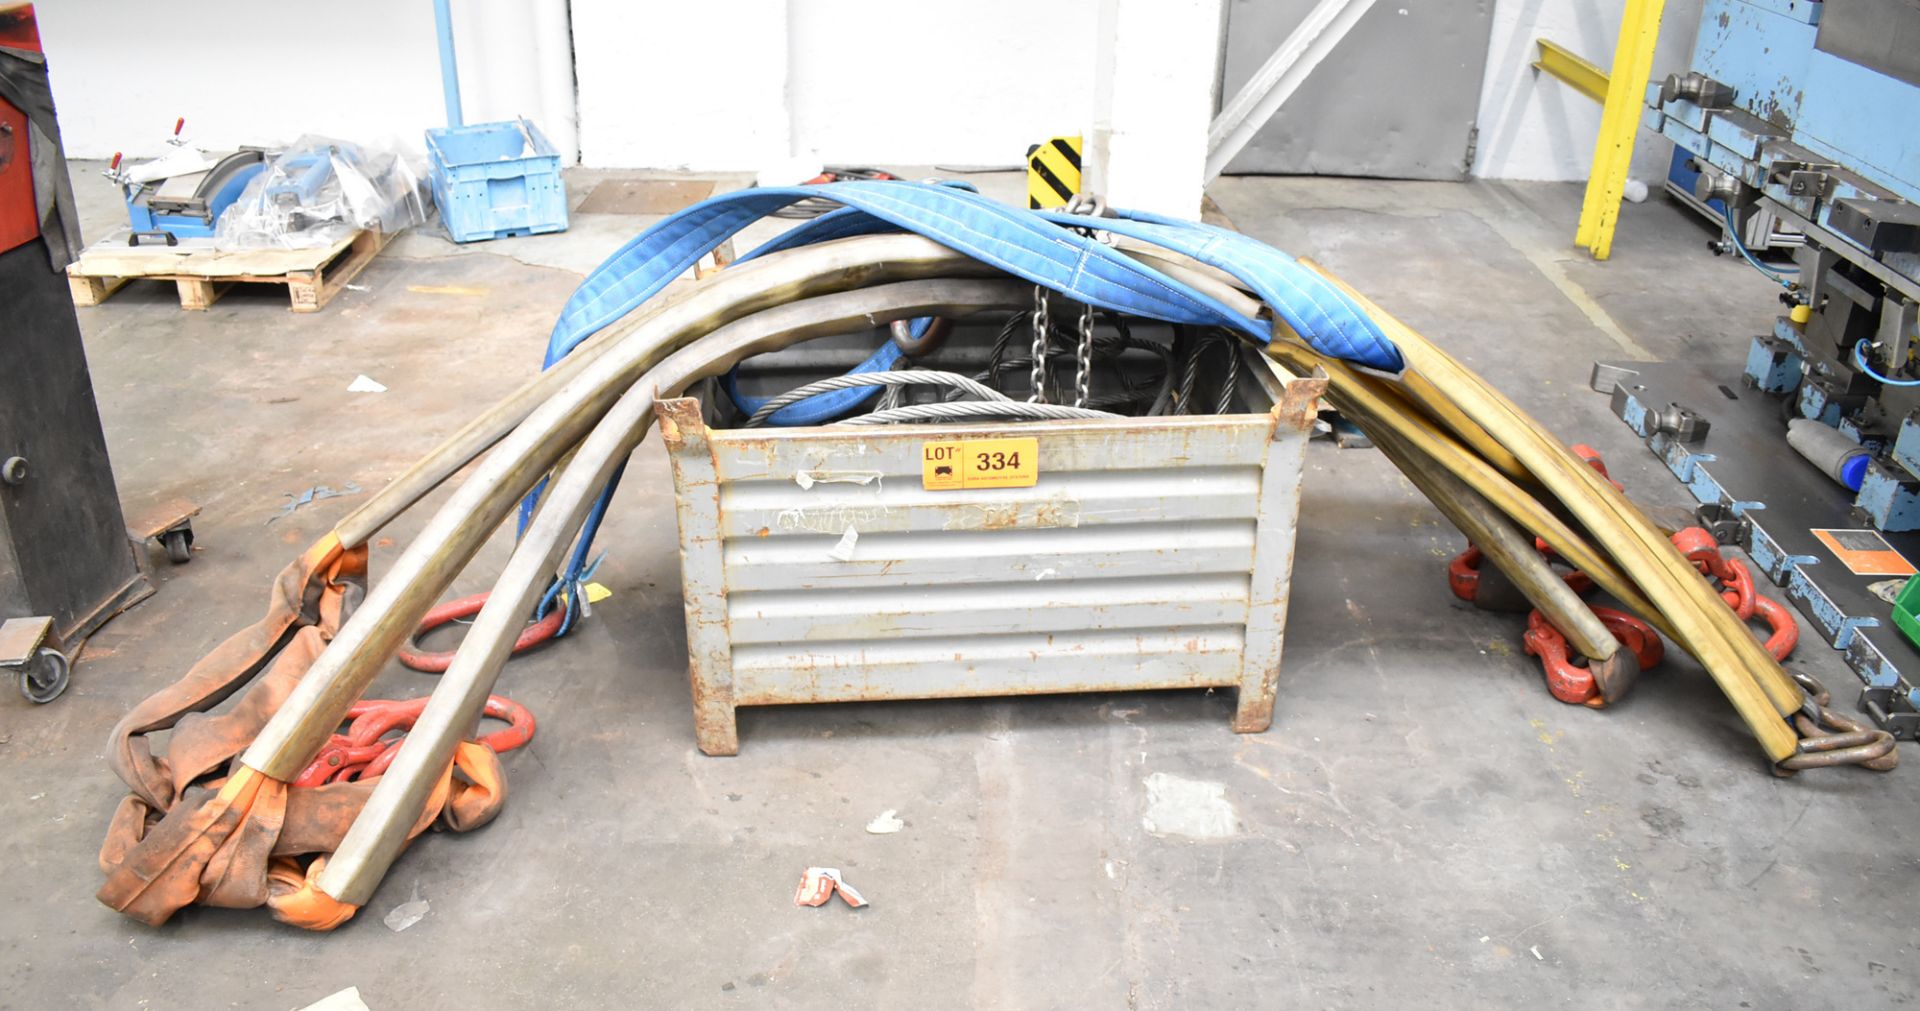 LOT/ HEAVY DUTY RIGGING AND LIFTING SUPPLIES WITH BIN, S/N N/A (BAU 3) [Removal Fee = € 11 +